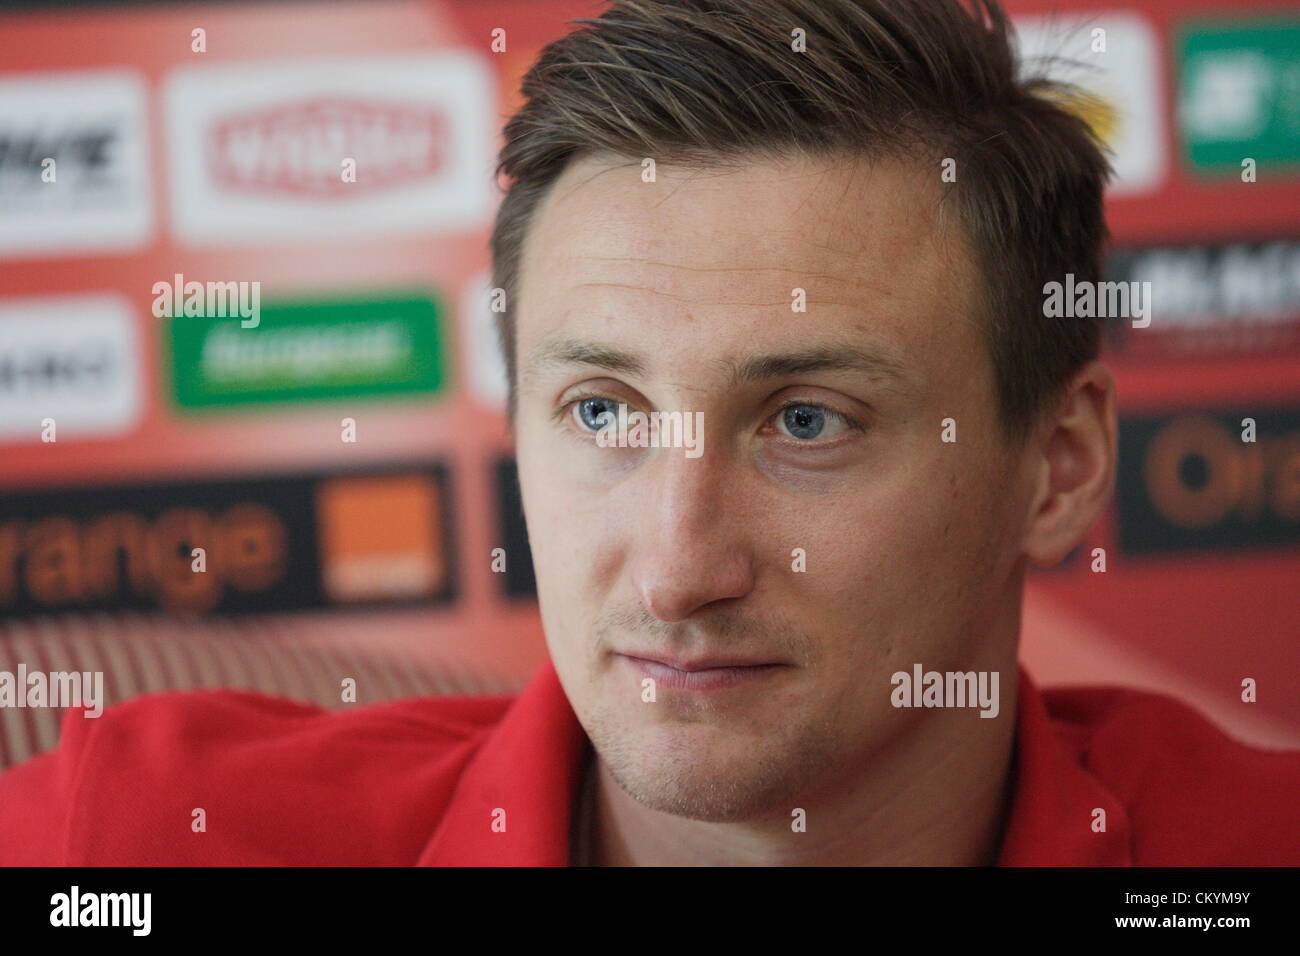 Gdansk, Poland 4th, September 2012 Press conference during Polish National Football Team redying to Poland v Montenegro game, wich will take place on 7th September in Montenegro. Goalkeeper Przemyslaw Tyton  takes part in the press conference Stock Photo